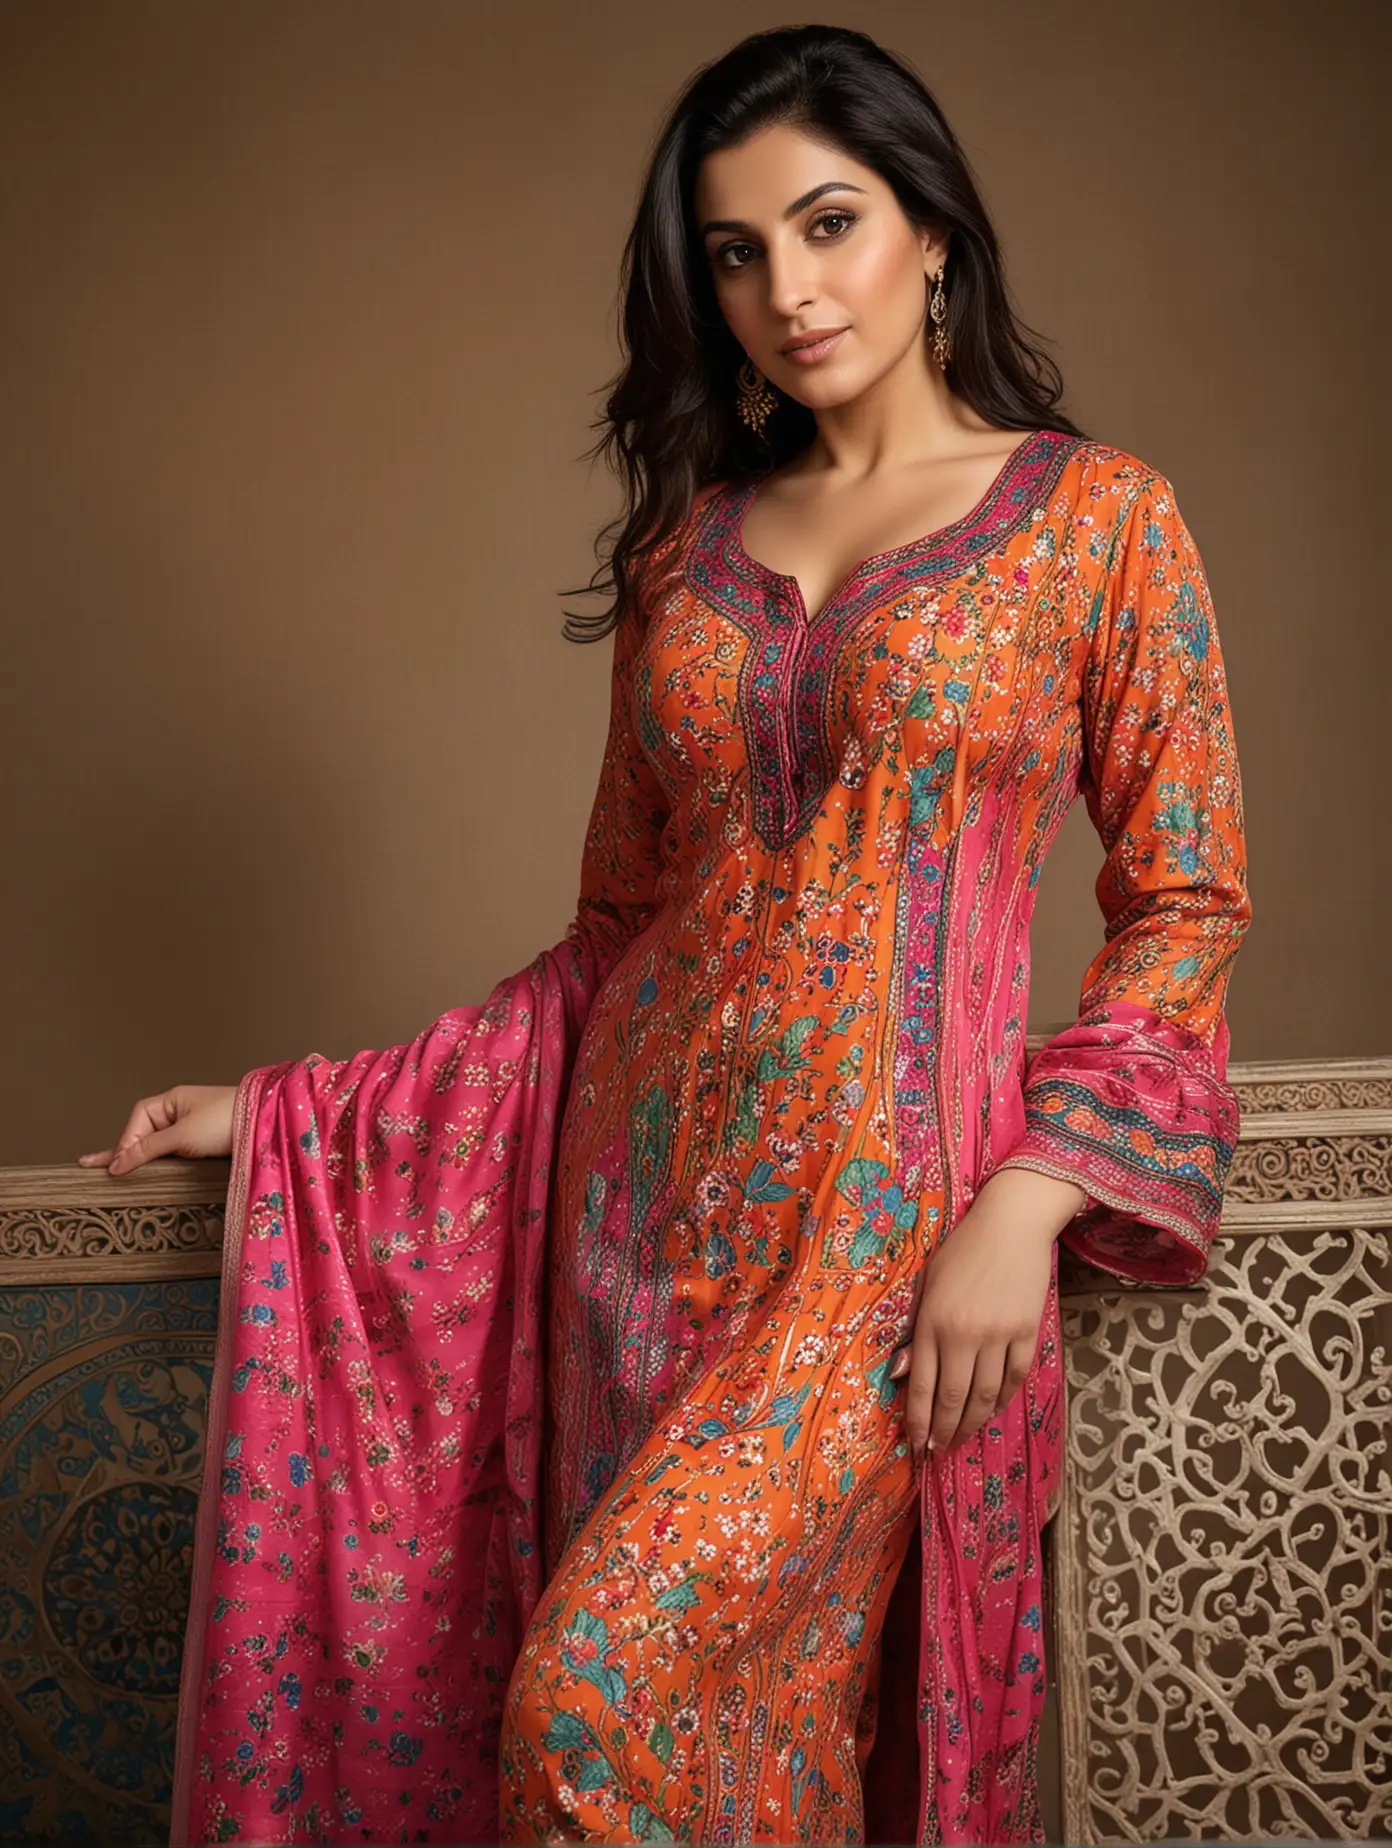 Alluring Iranian Woman in Traditional Salwar Kameez with Voluptuous 38DD Breasts